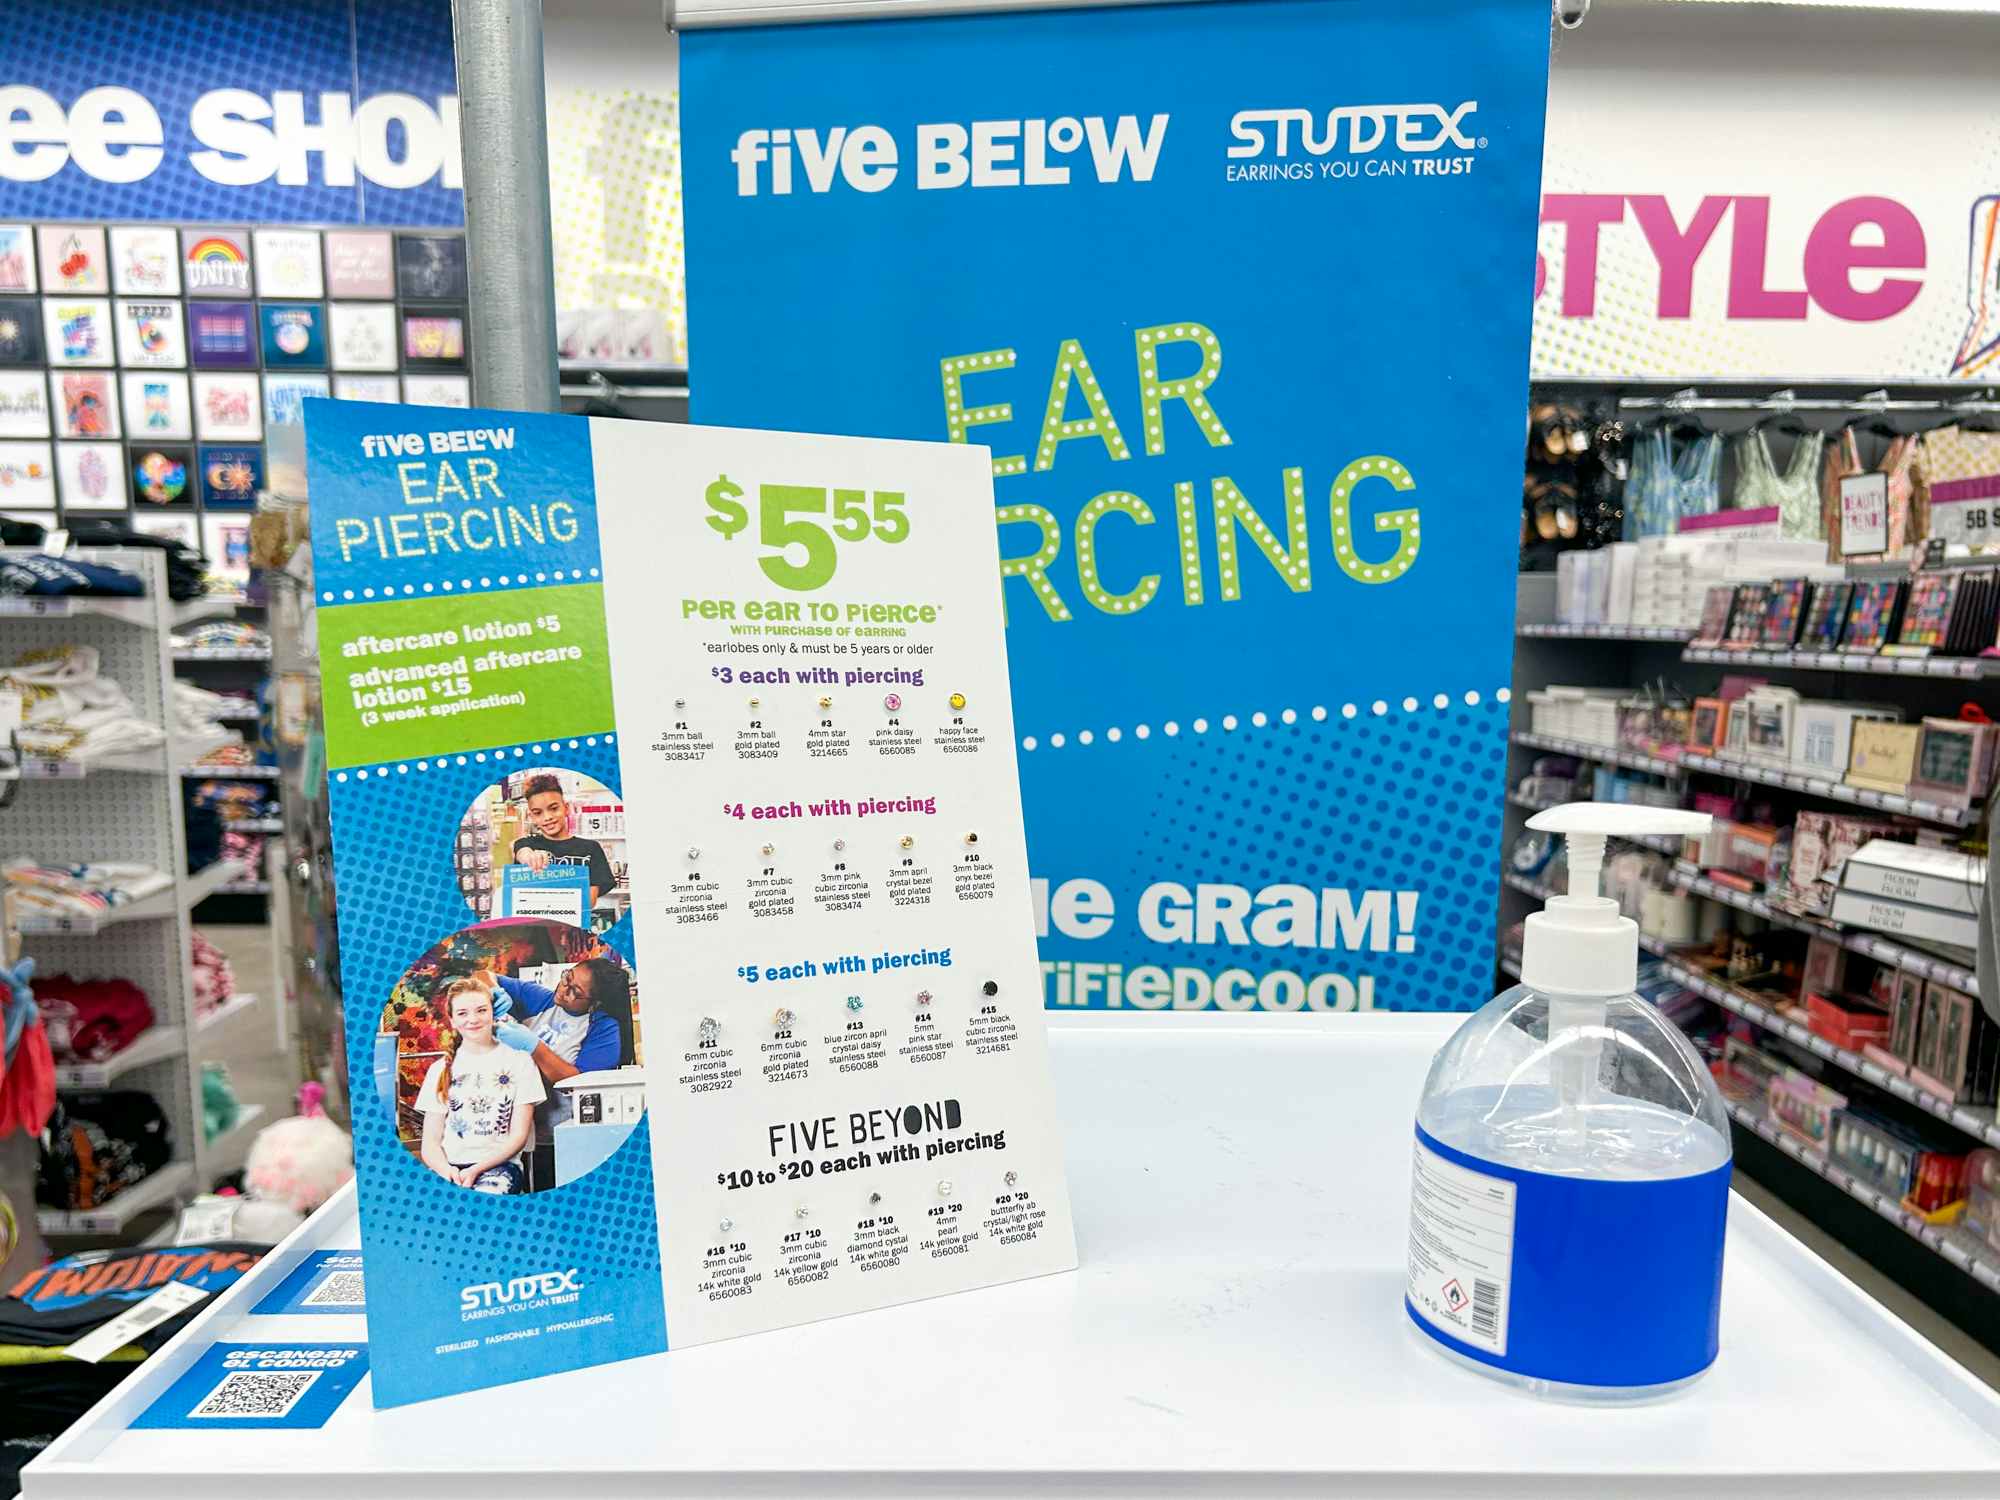 The ear piercing station inside Five Below with a sign of prices for earrings and hand sanitizer